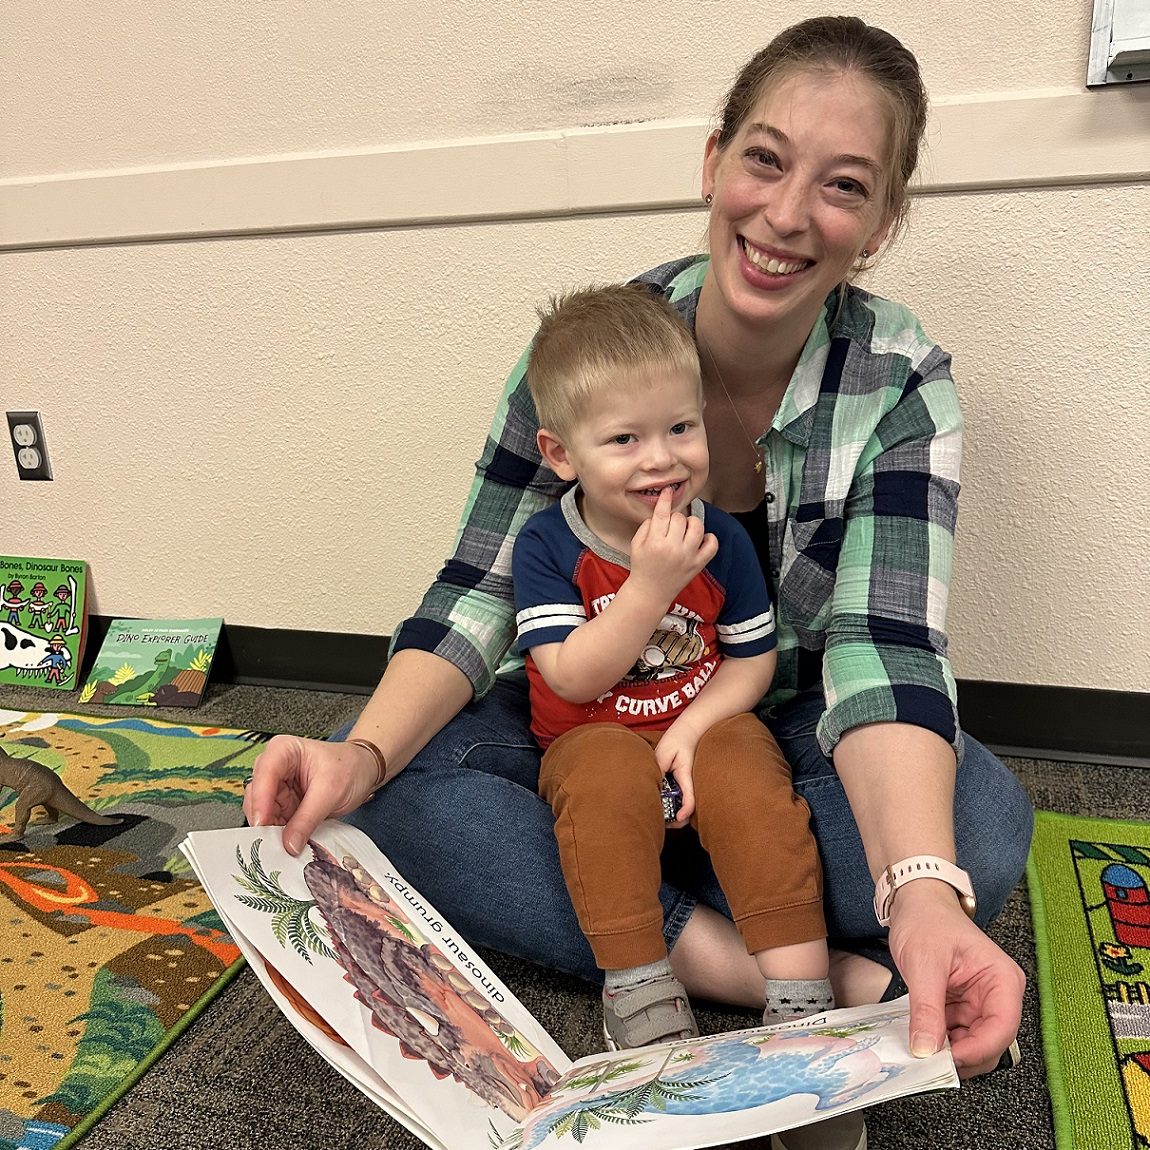 woman holding sitting on floor with a child on her lap showing him a book